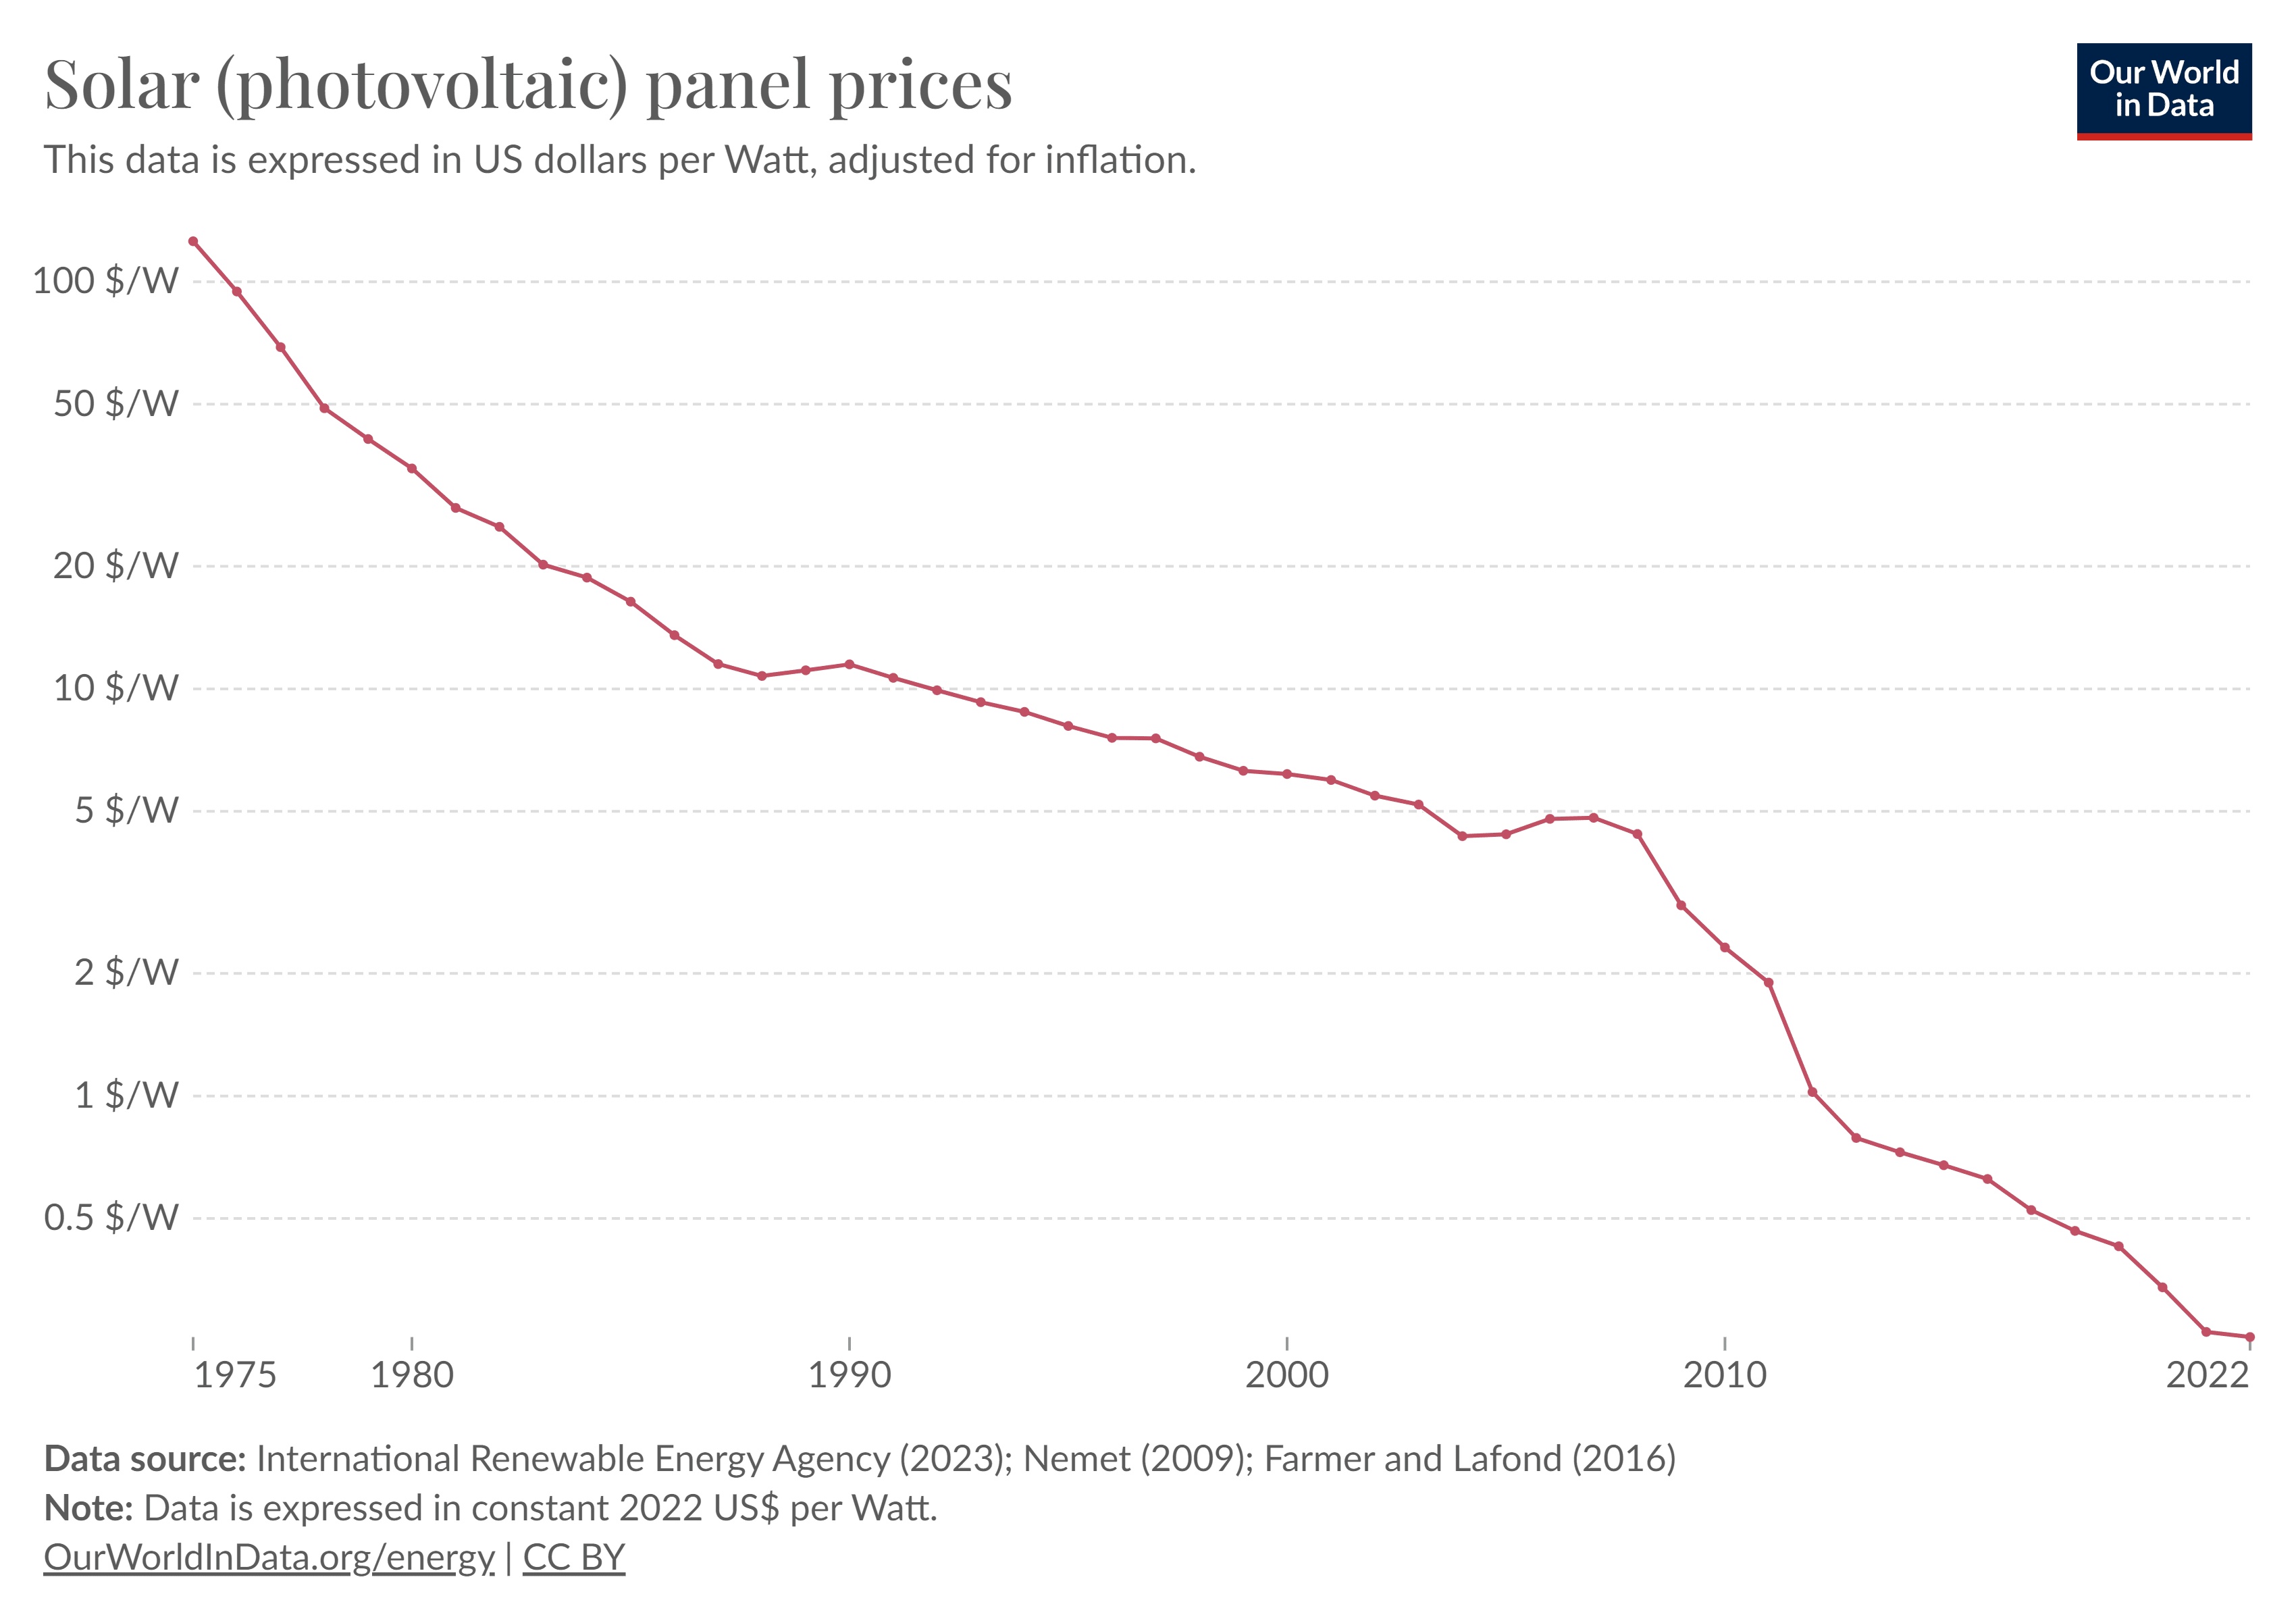 A graph showing Solar PC panel prices per watt from 2022 to 1975 on a downward linear trend from $100/W in 1975 to less than $0.25 in 2022